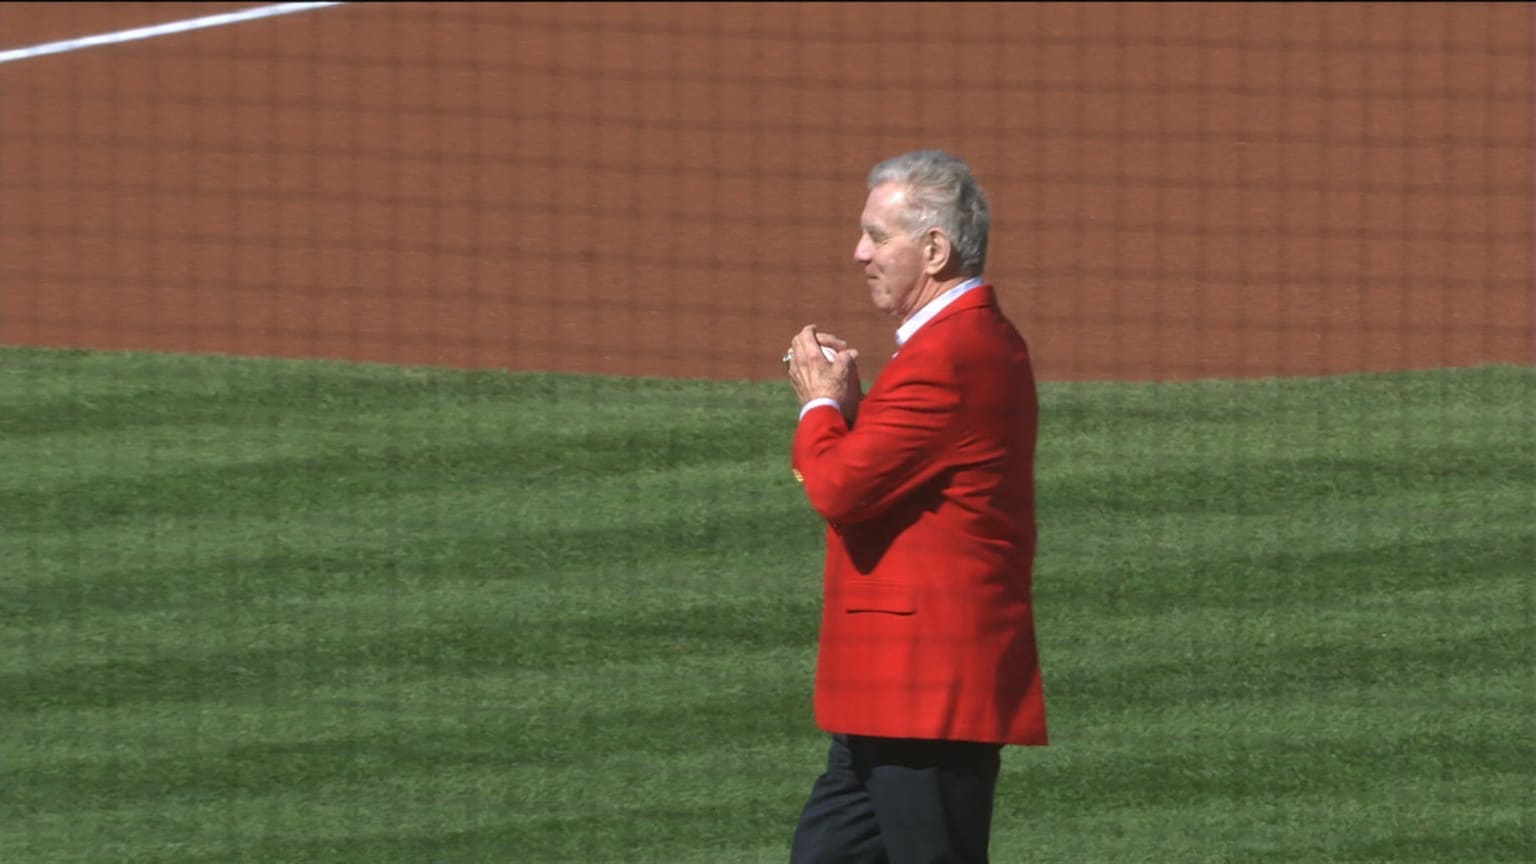 Tim McCarver throws first pitch | 10/07/2019 | St. Louis Cardinals